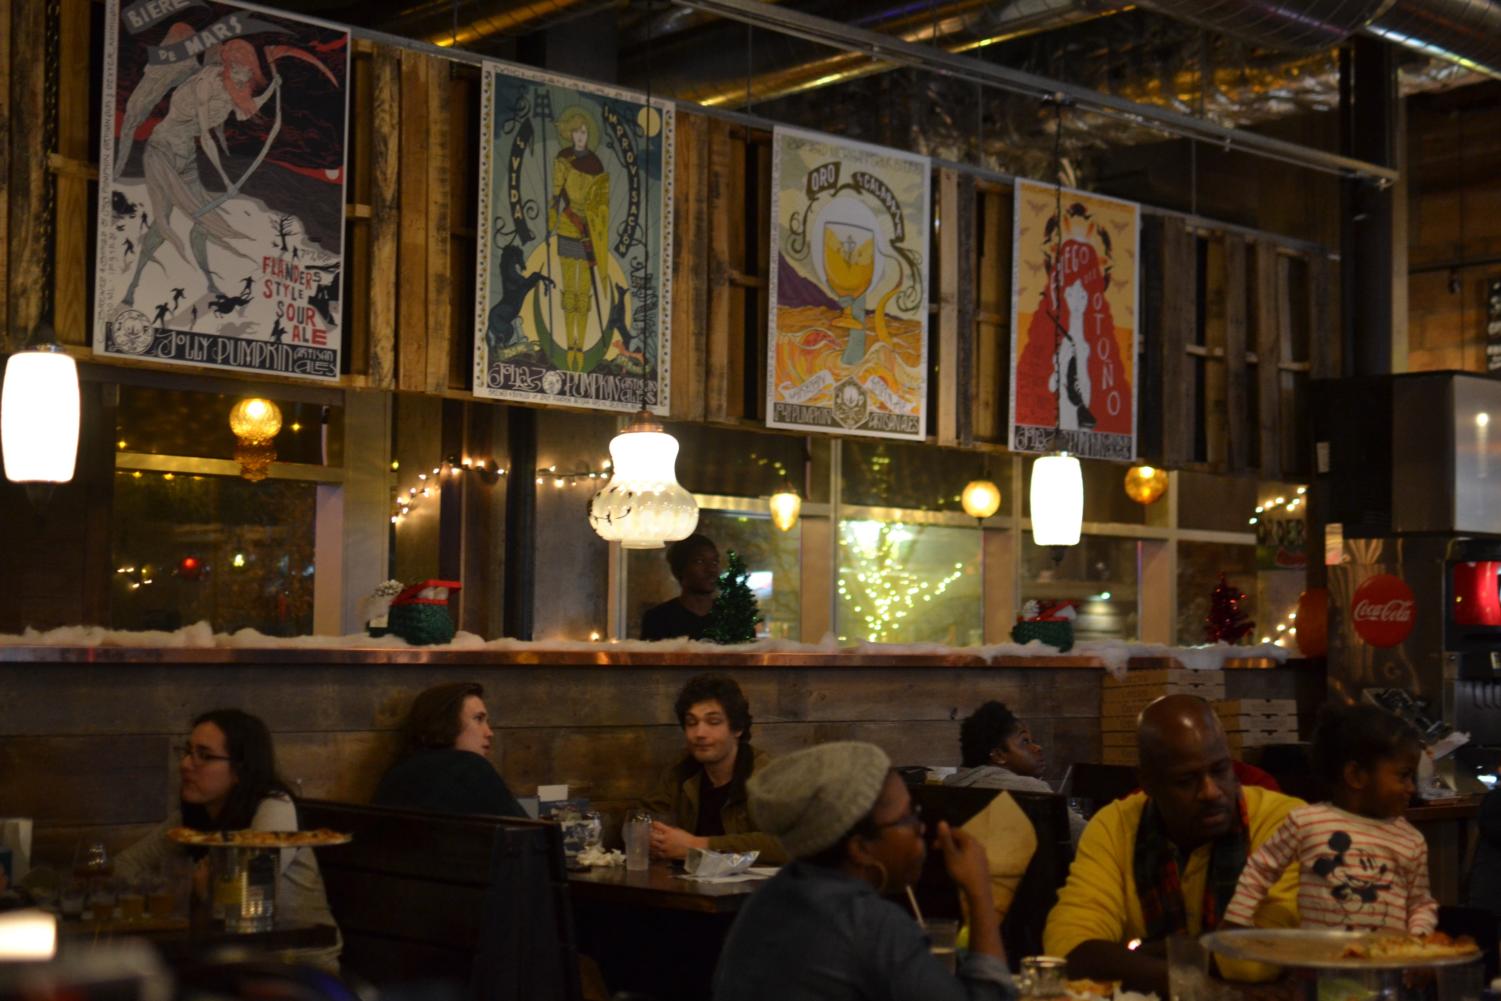 Jolly Pumpkin is the newest addition to Hyde Park's bar scene.